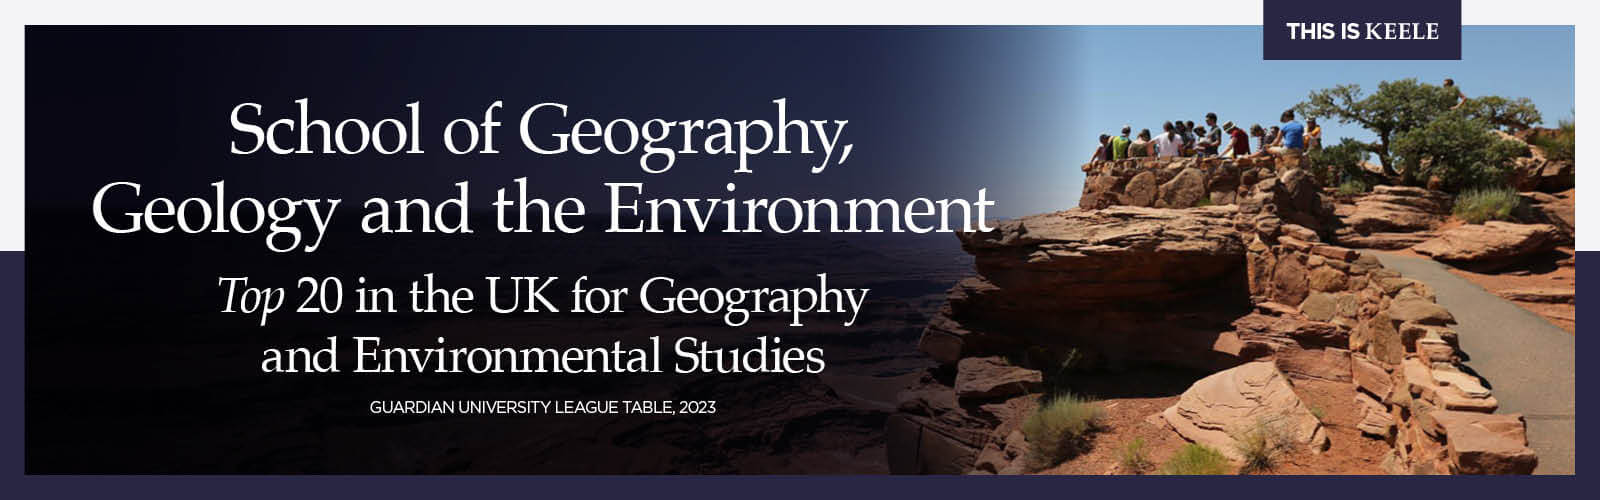 The School of Geography, Geology and the Environment banner